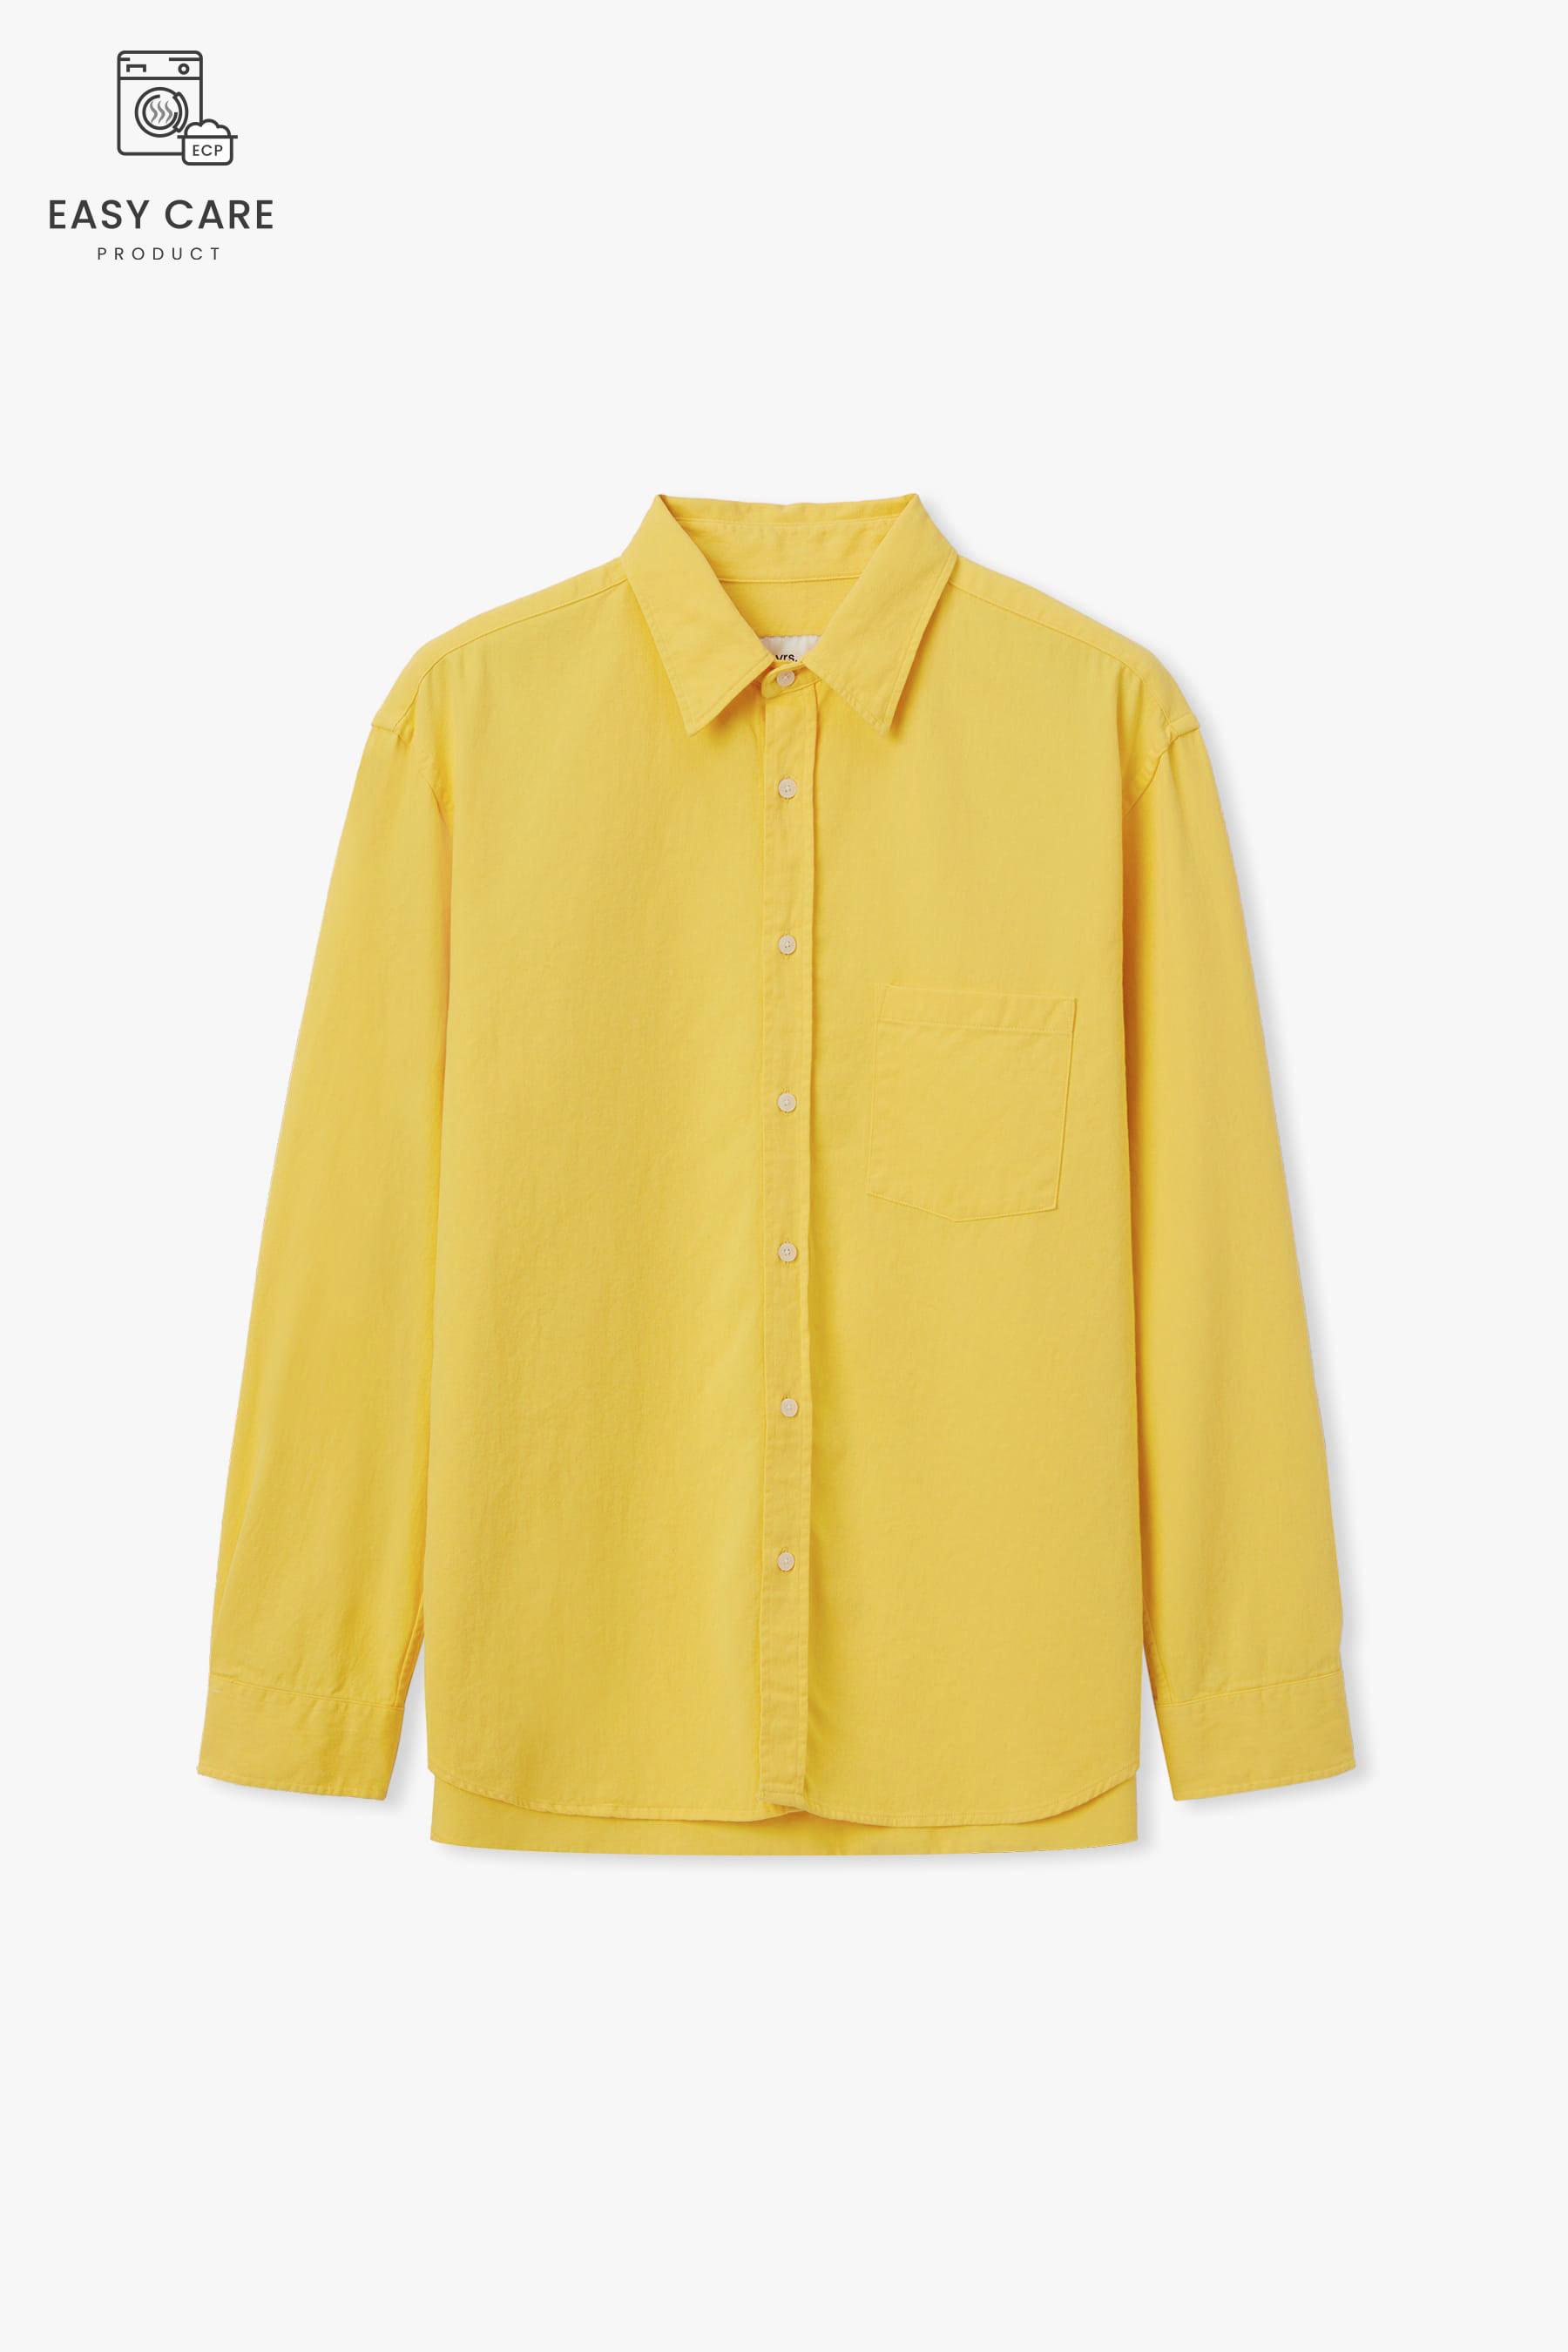 YELLOW YRS POIKA COTTON DRILL WASHED SHIRTS CLASSIC FIT (ECP GARMENT PROCESS)